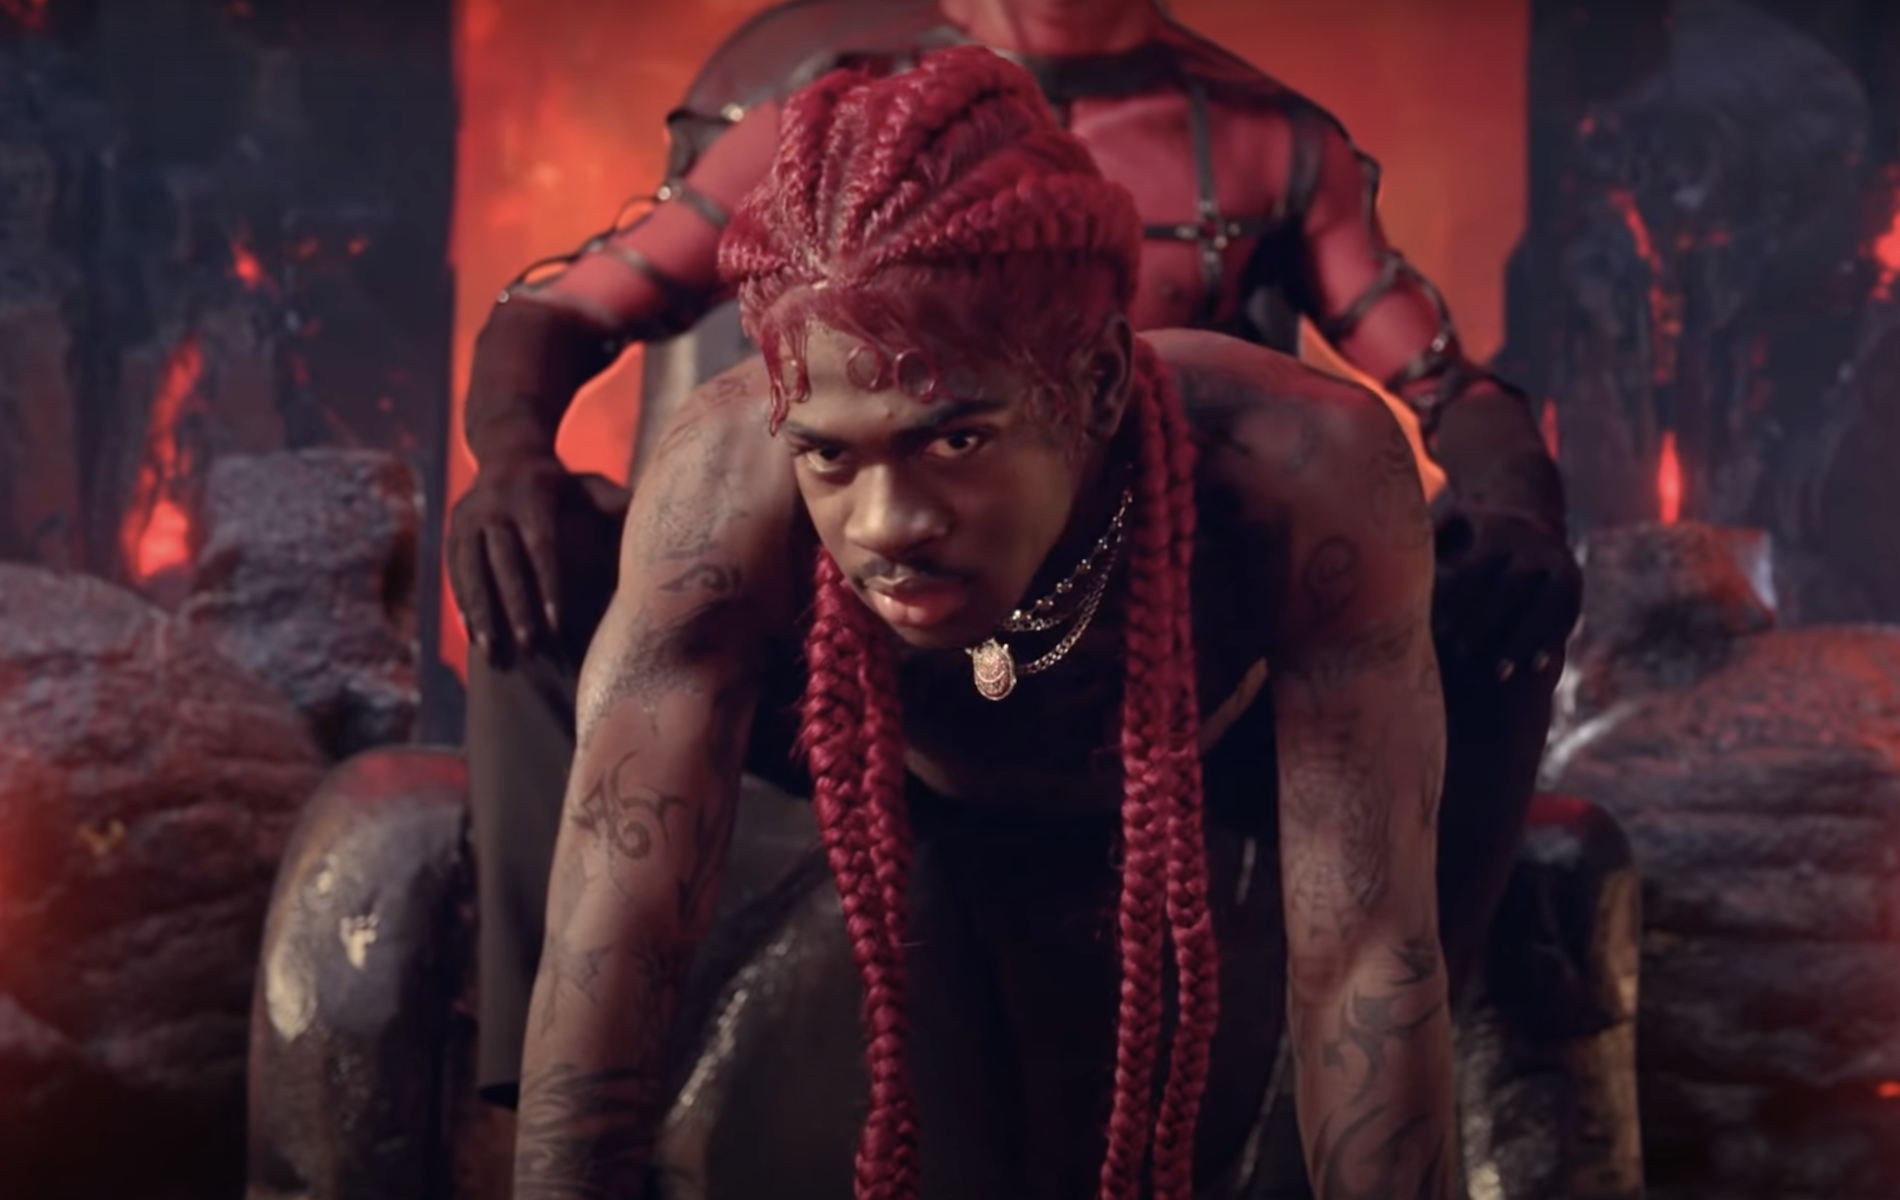 Lil Nas X Gives Satan a Lap Dance in a Fiery, Very Queer New Video 